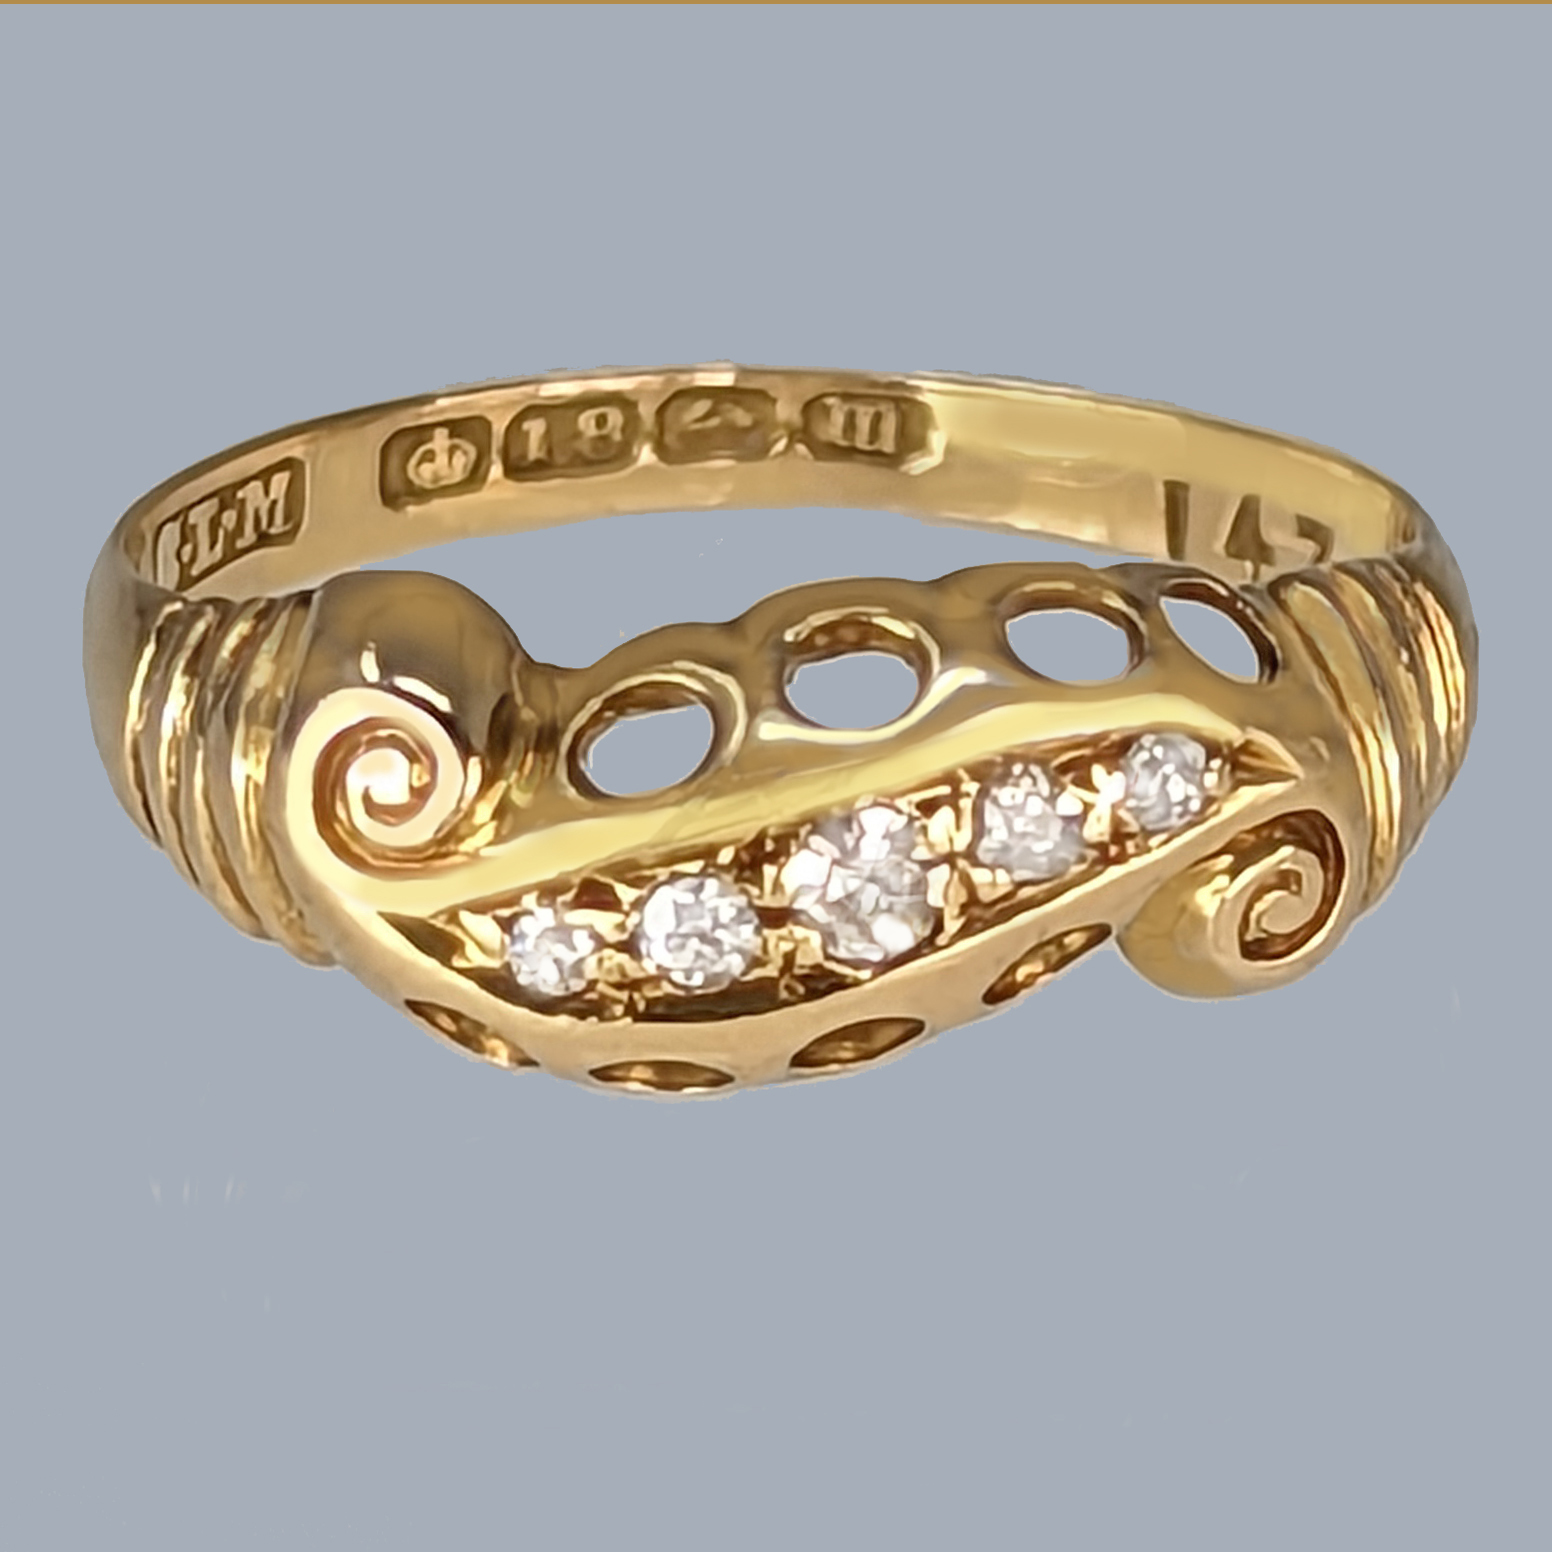 Victorian Gold Gipsy Ring Marked C.L.M